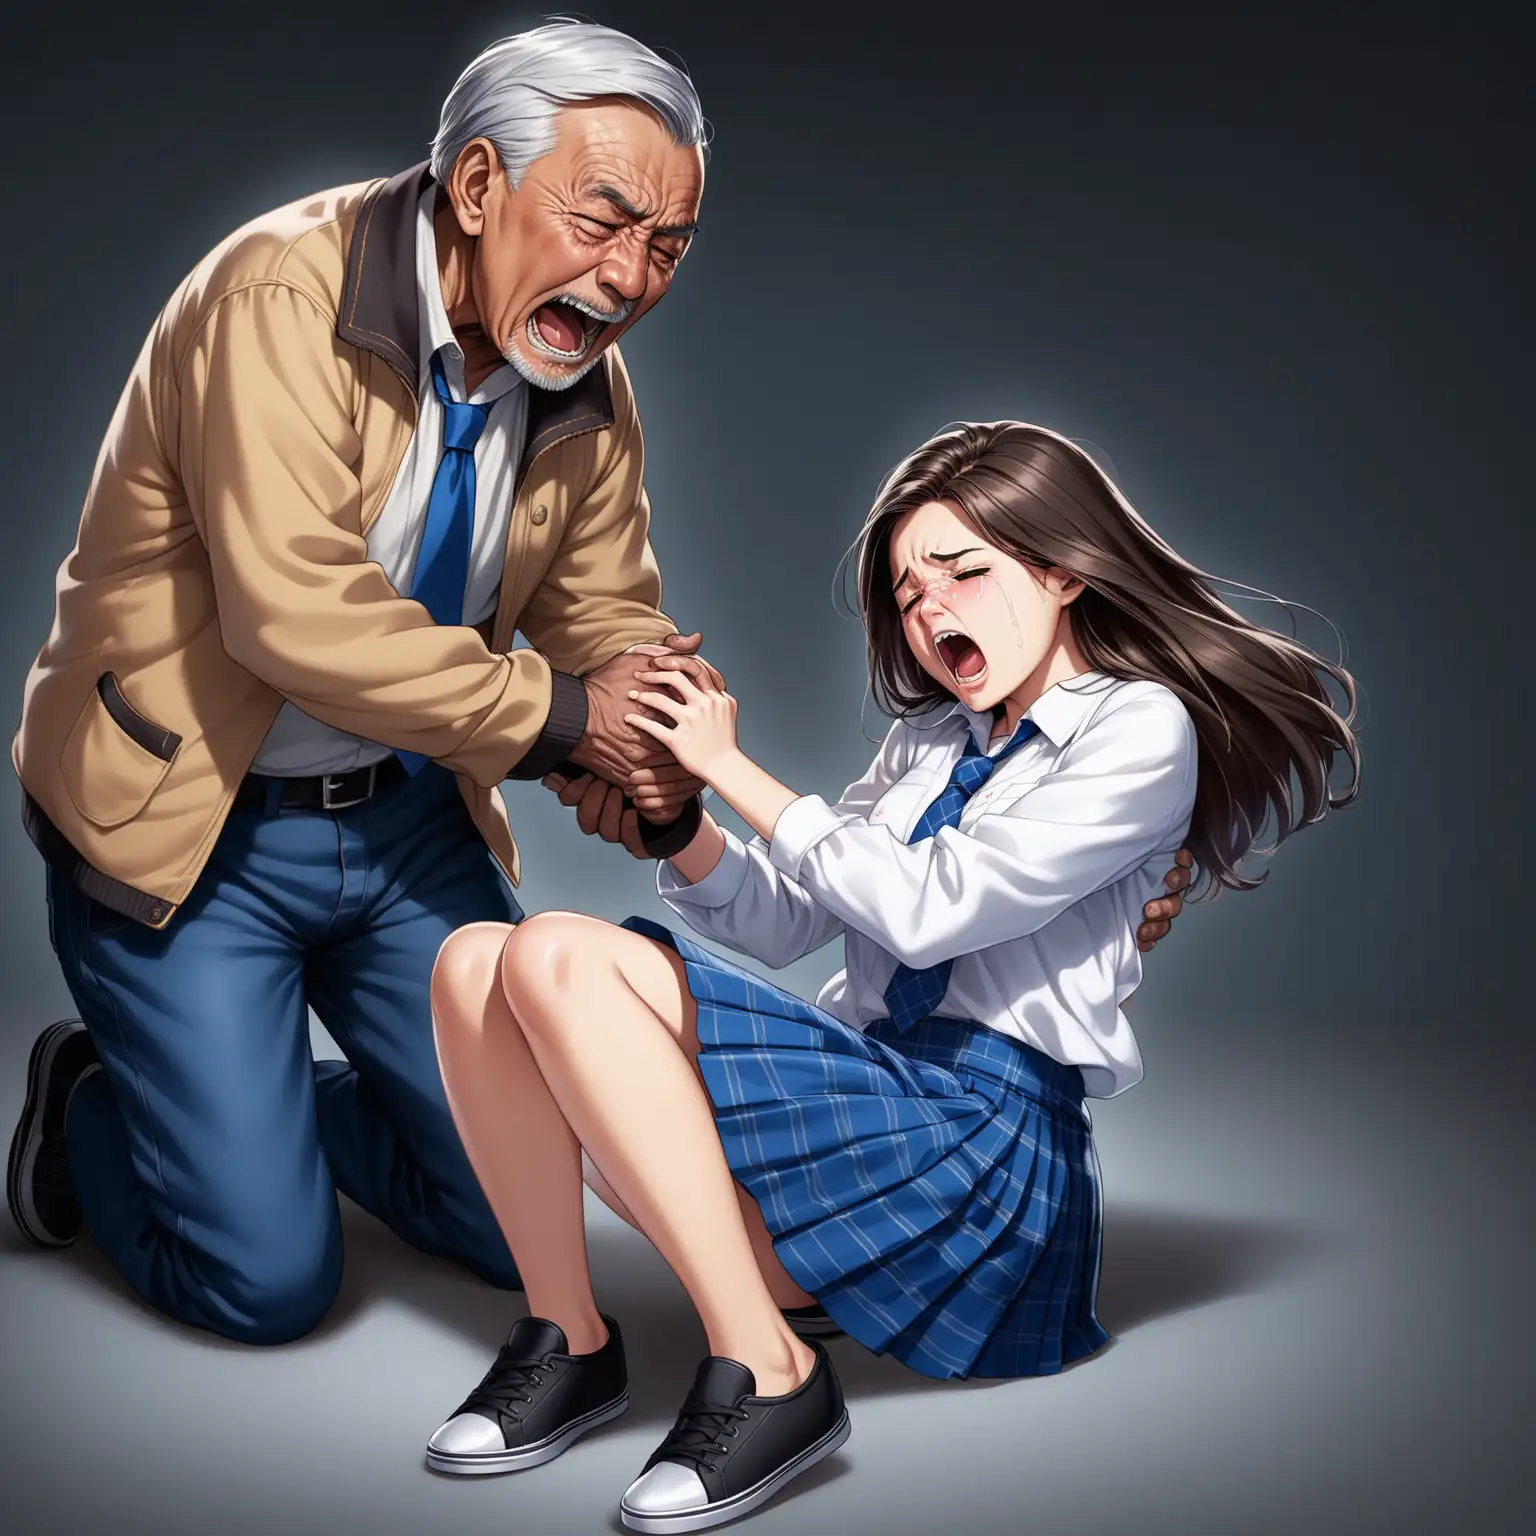 Young Woman Comforted by Elderly Man in Studio Scene